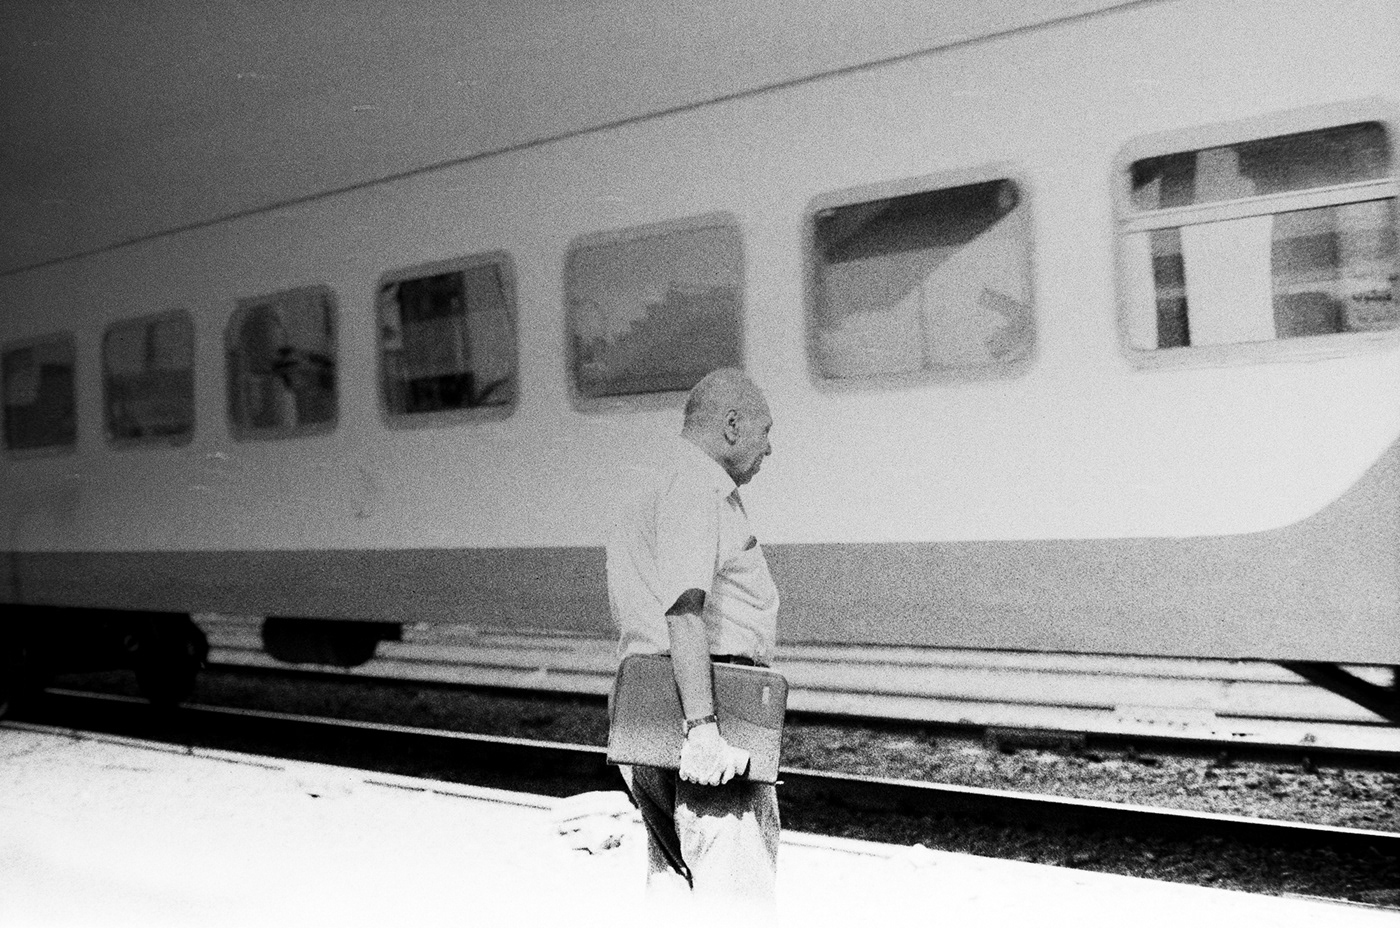 analog photography film photography expired film black and white 35mm 35mm analog camera film portrait canon ae-1 Illford